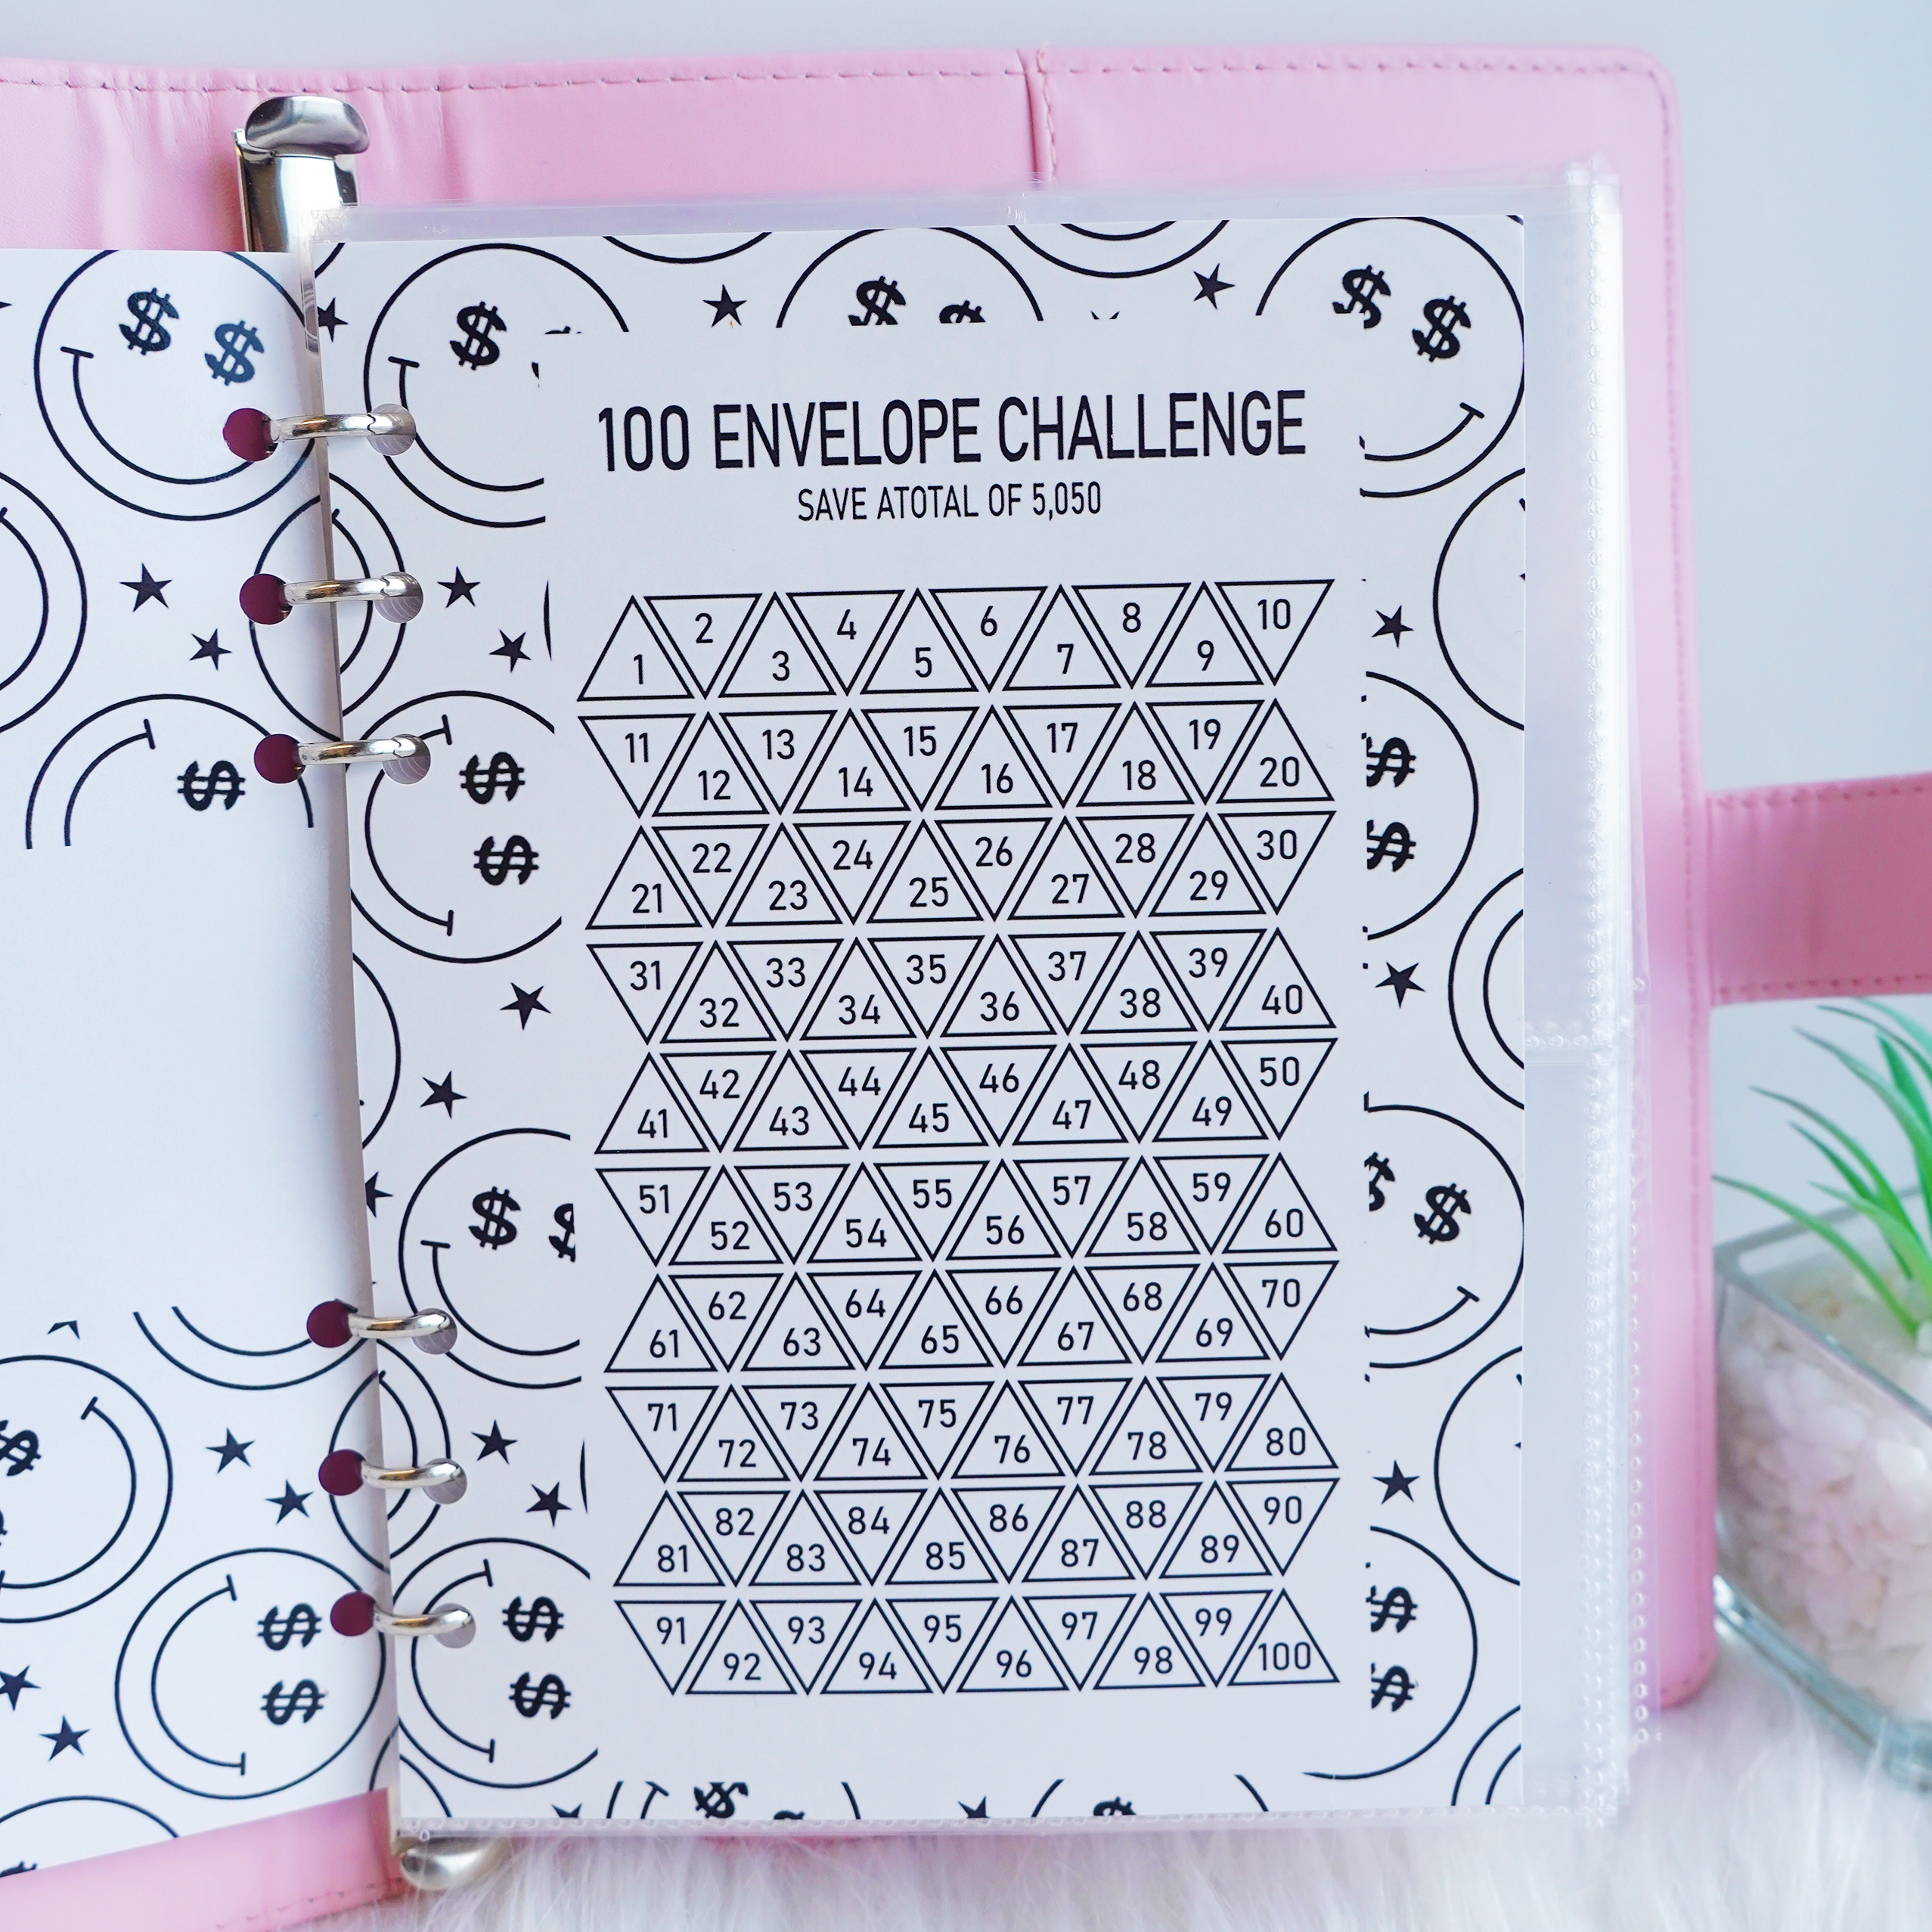 100 Envelope Challenge Leather Binder-Easy And fun Way To Save $5,050🔥